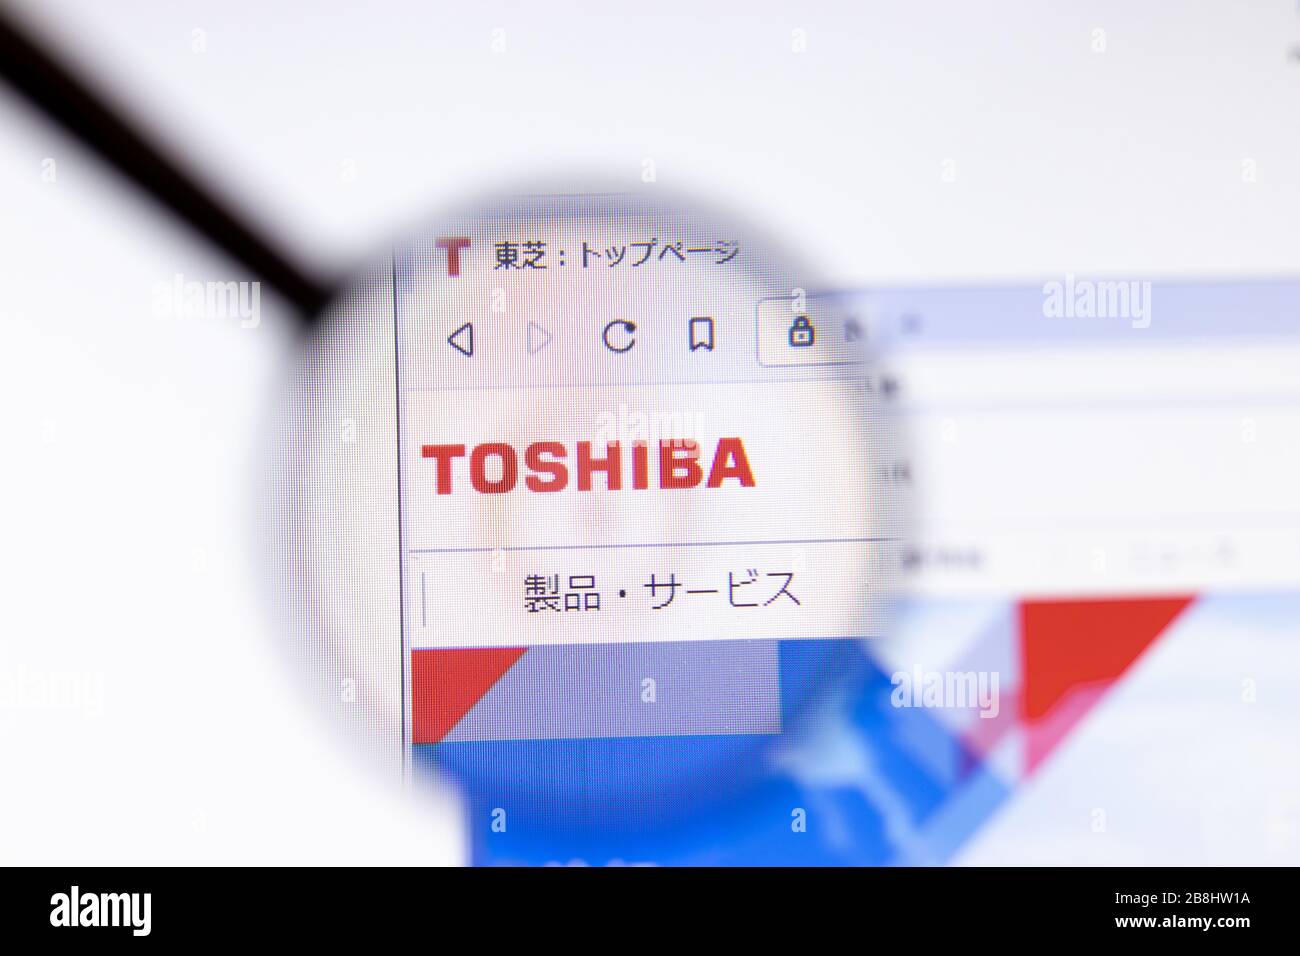 Los Angeles, California, USA - 20 March 2020: Toshiba company logo on website page close-up on screen, Illustrative Editorial Stock Photo